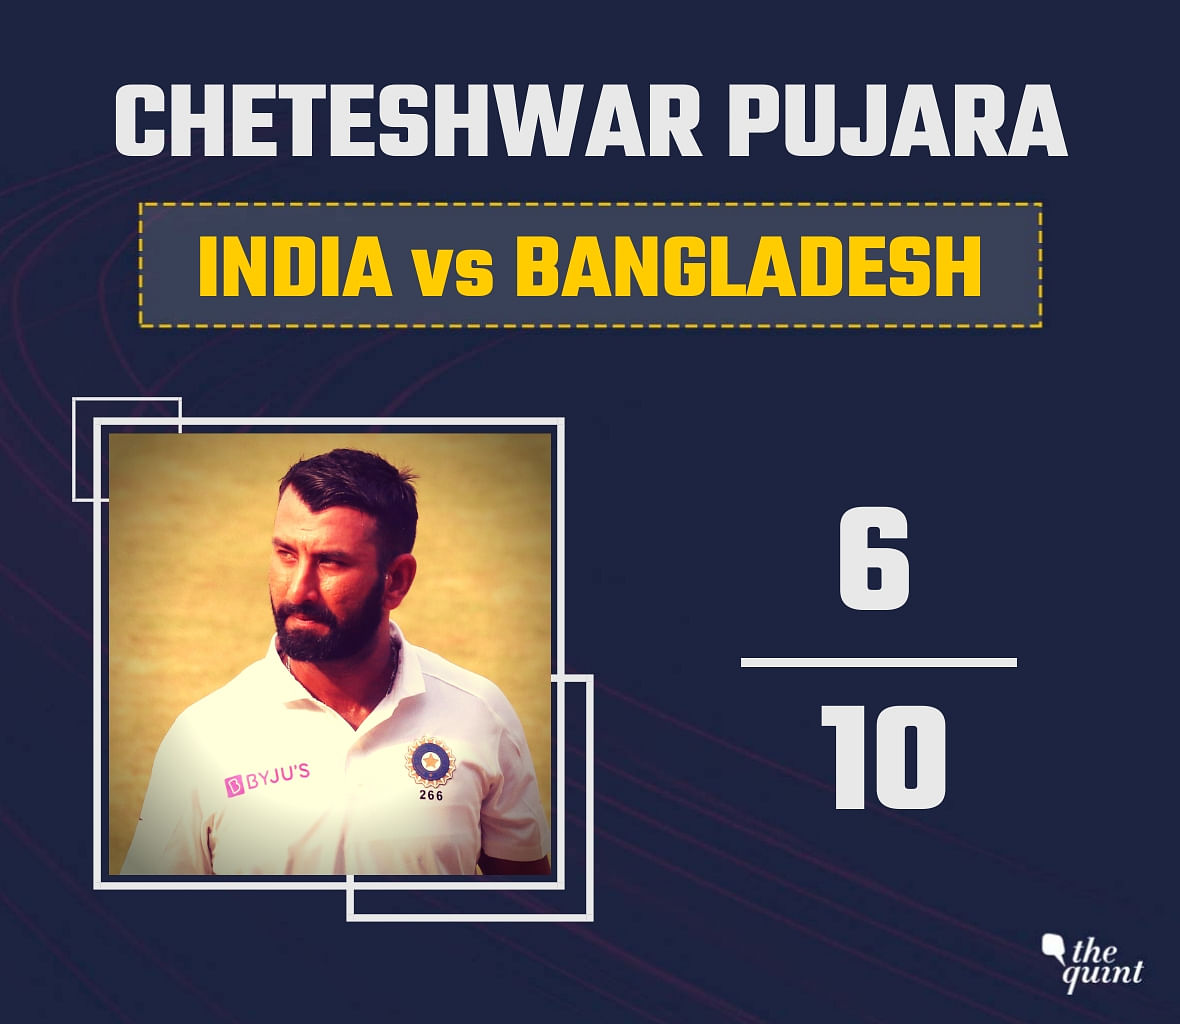 Here’s a look at how Team India fared in the two-match Test series against Bangladesh: